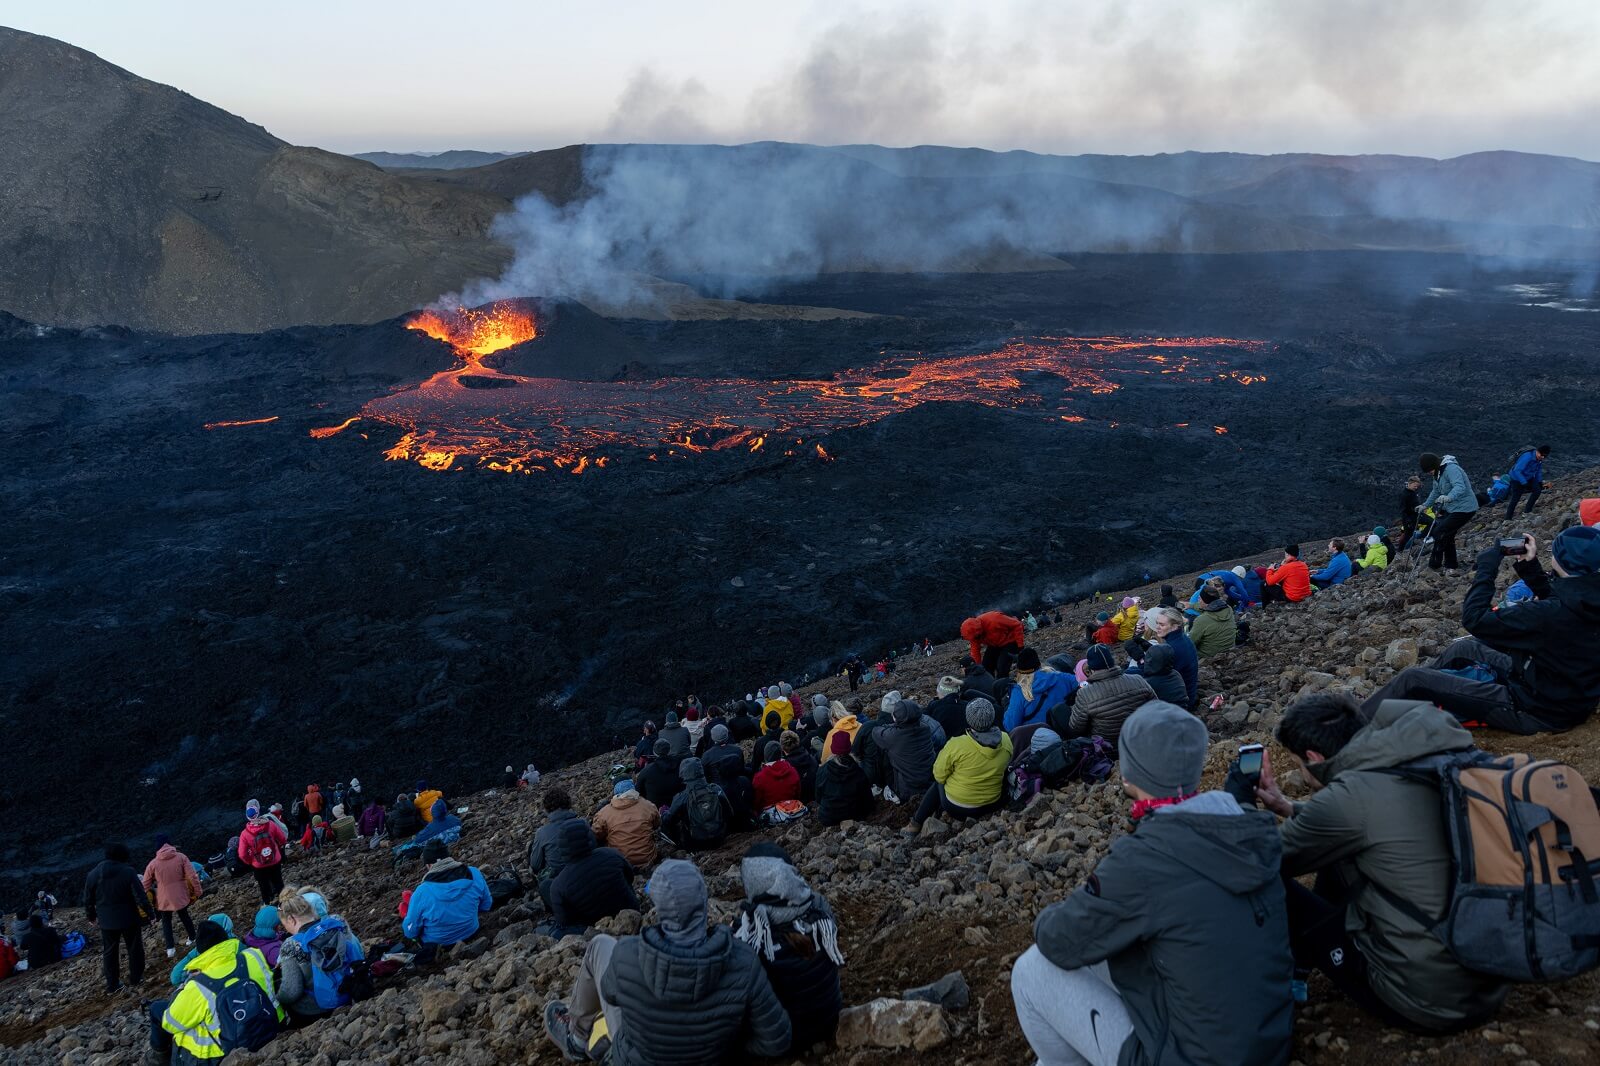 Visitors sit on a hillside watching the volcano erupt at Meradalir in Iceland.